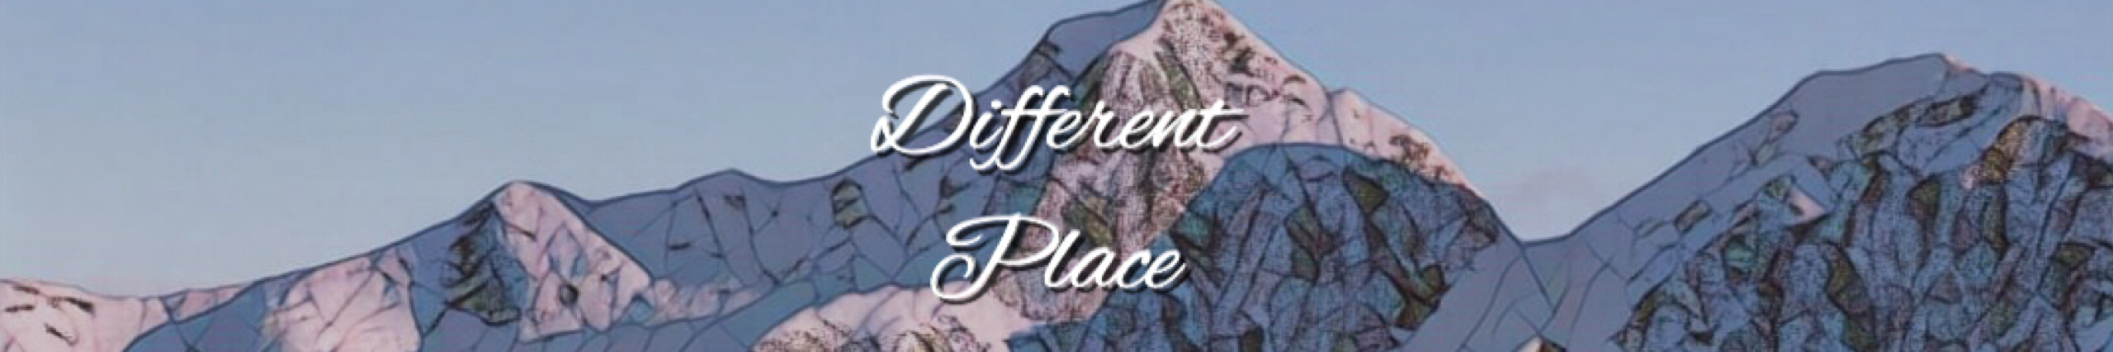 different place